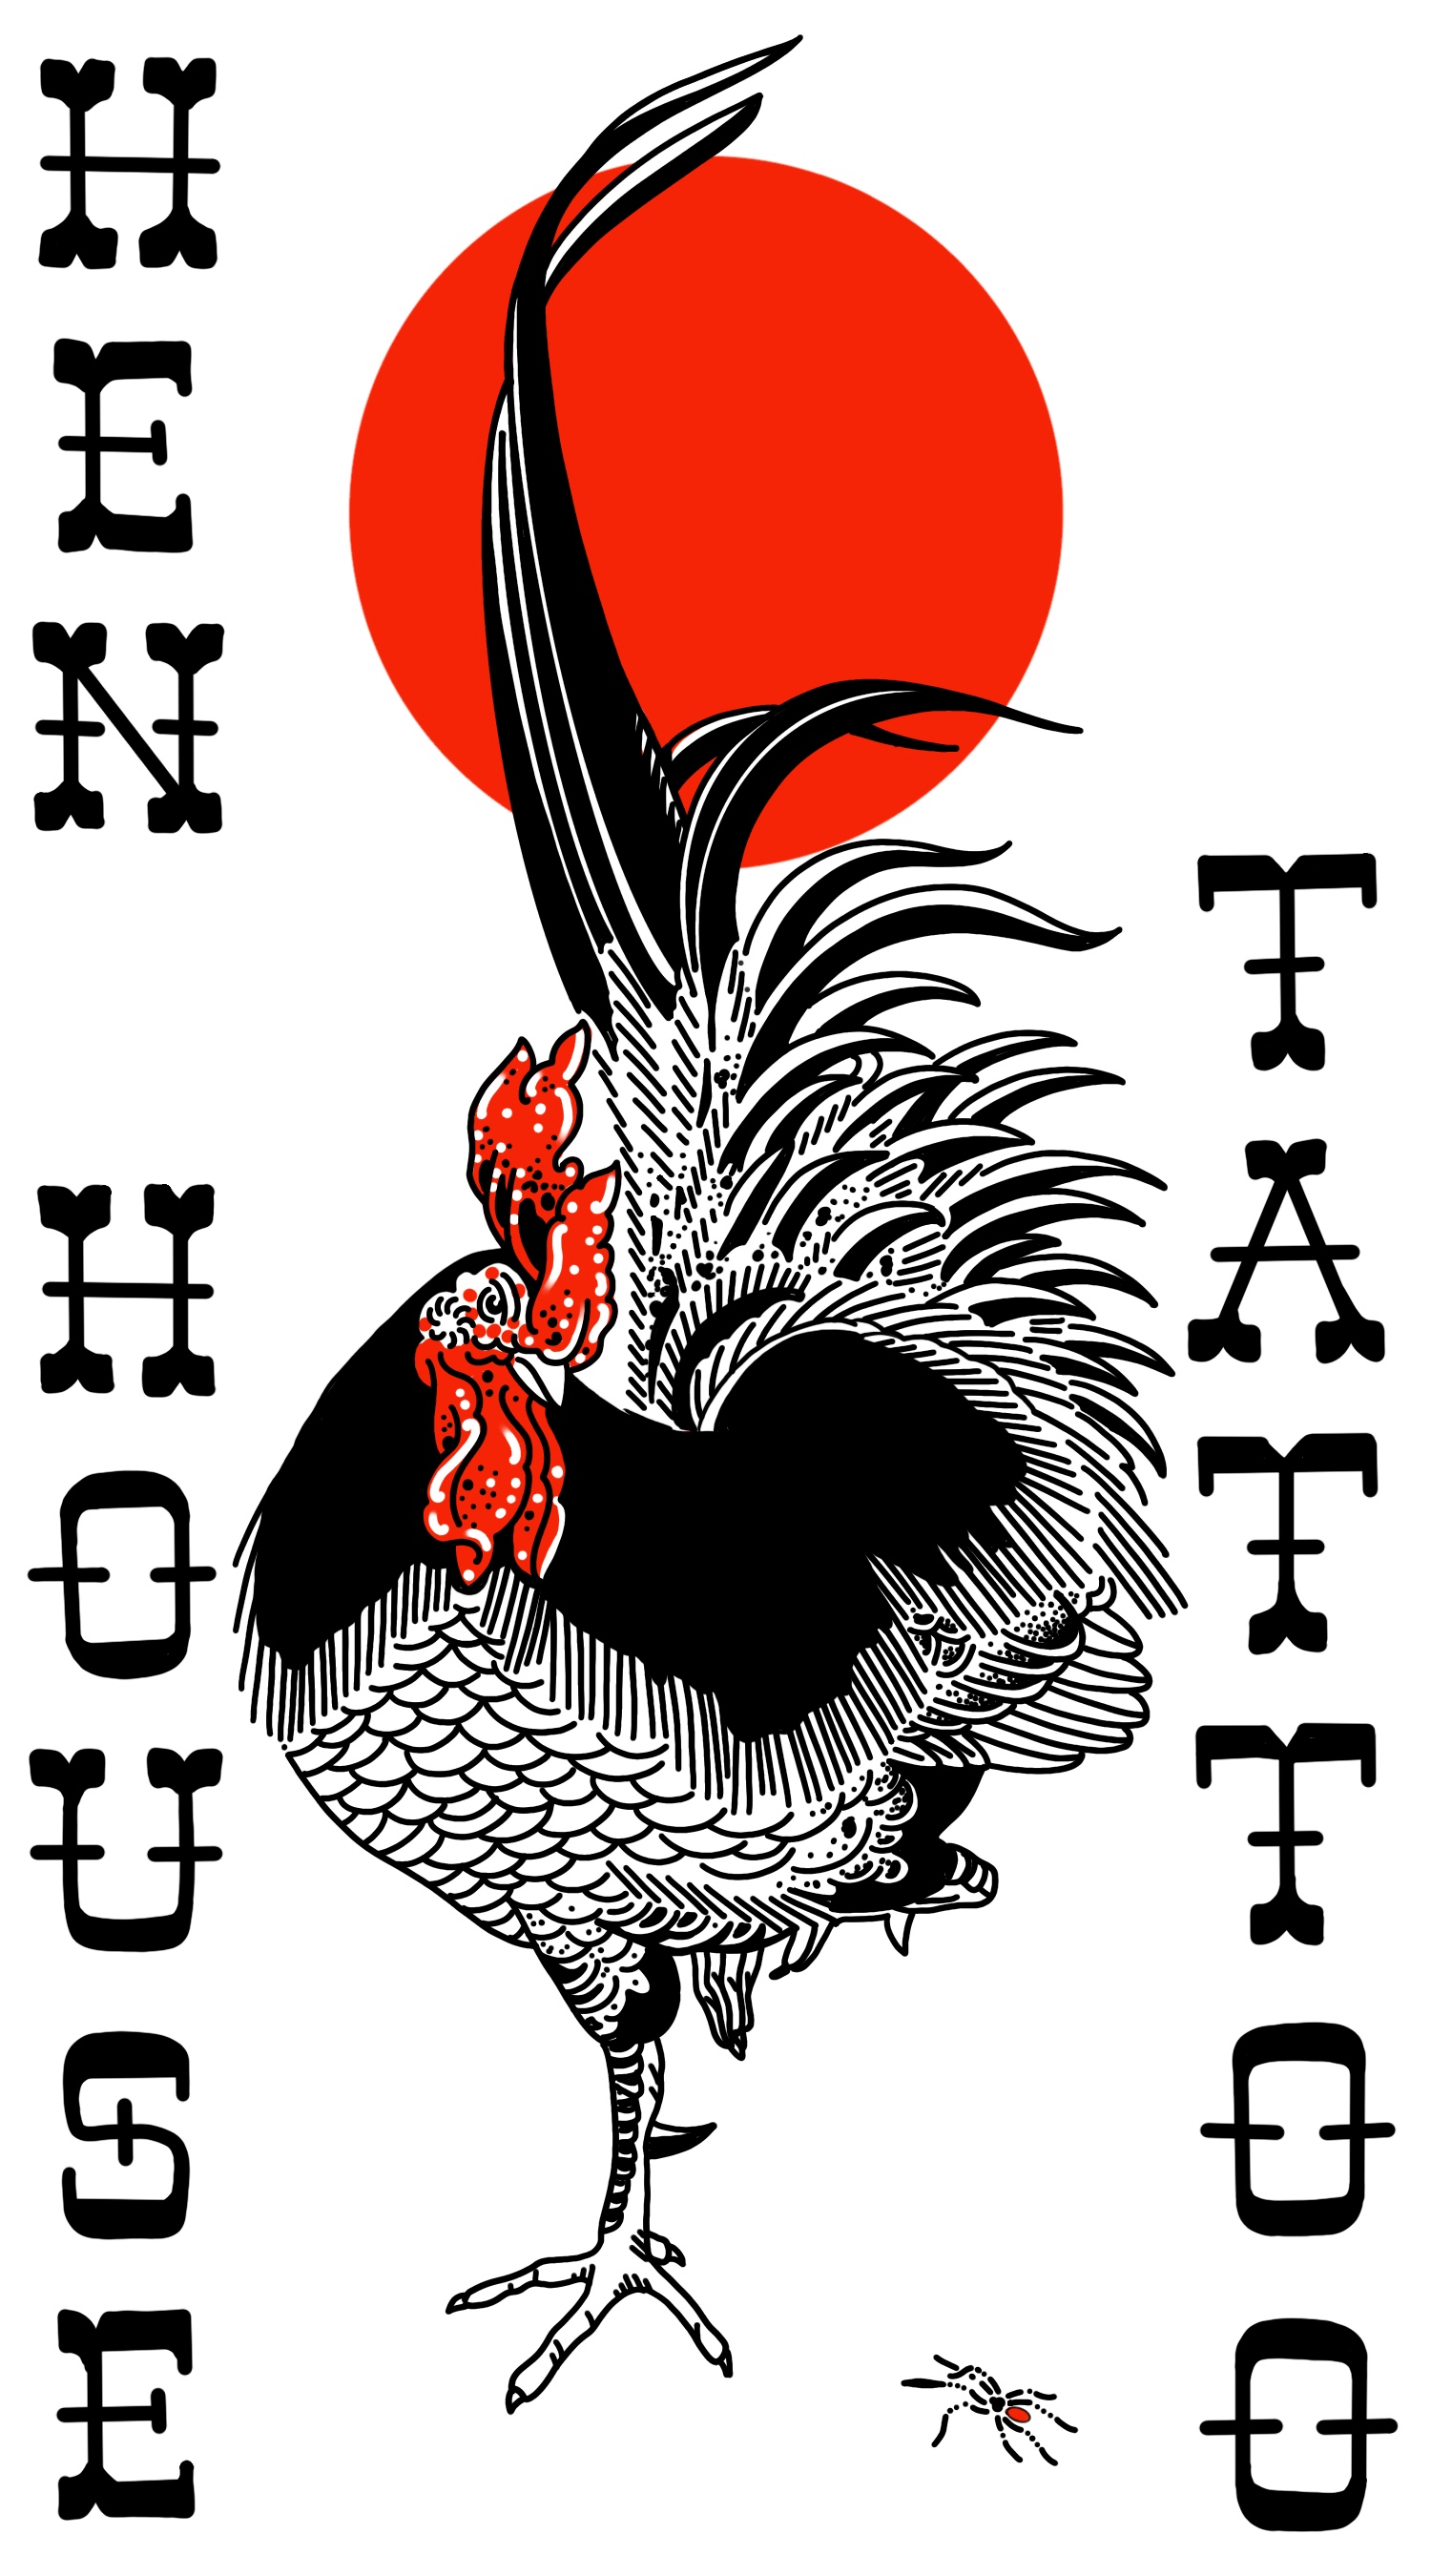 546 Rooster Fight Tattoo Images, Stock Photos, 3D objects, & Vectors |  Shutterstock